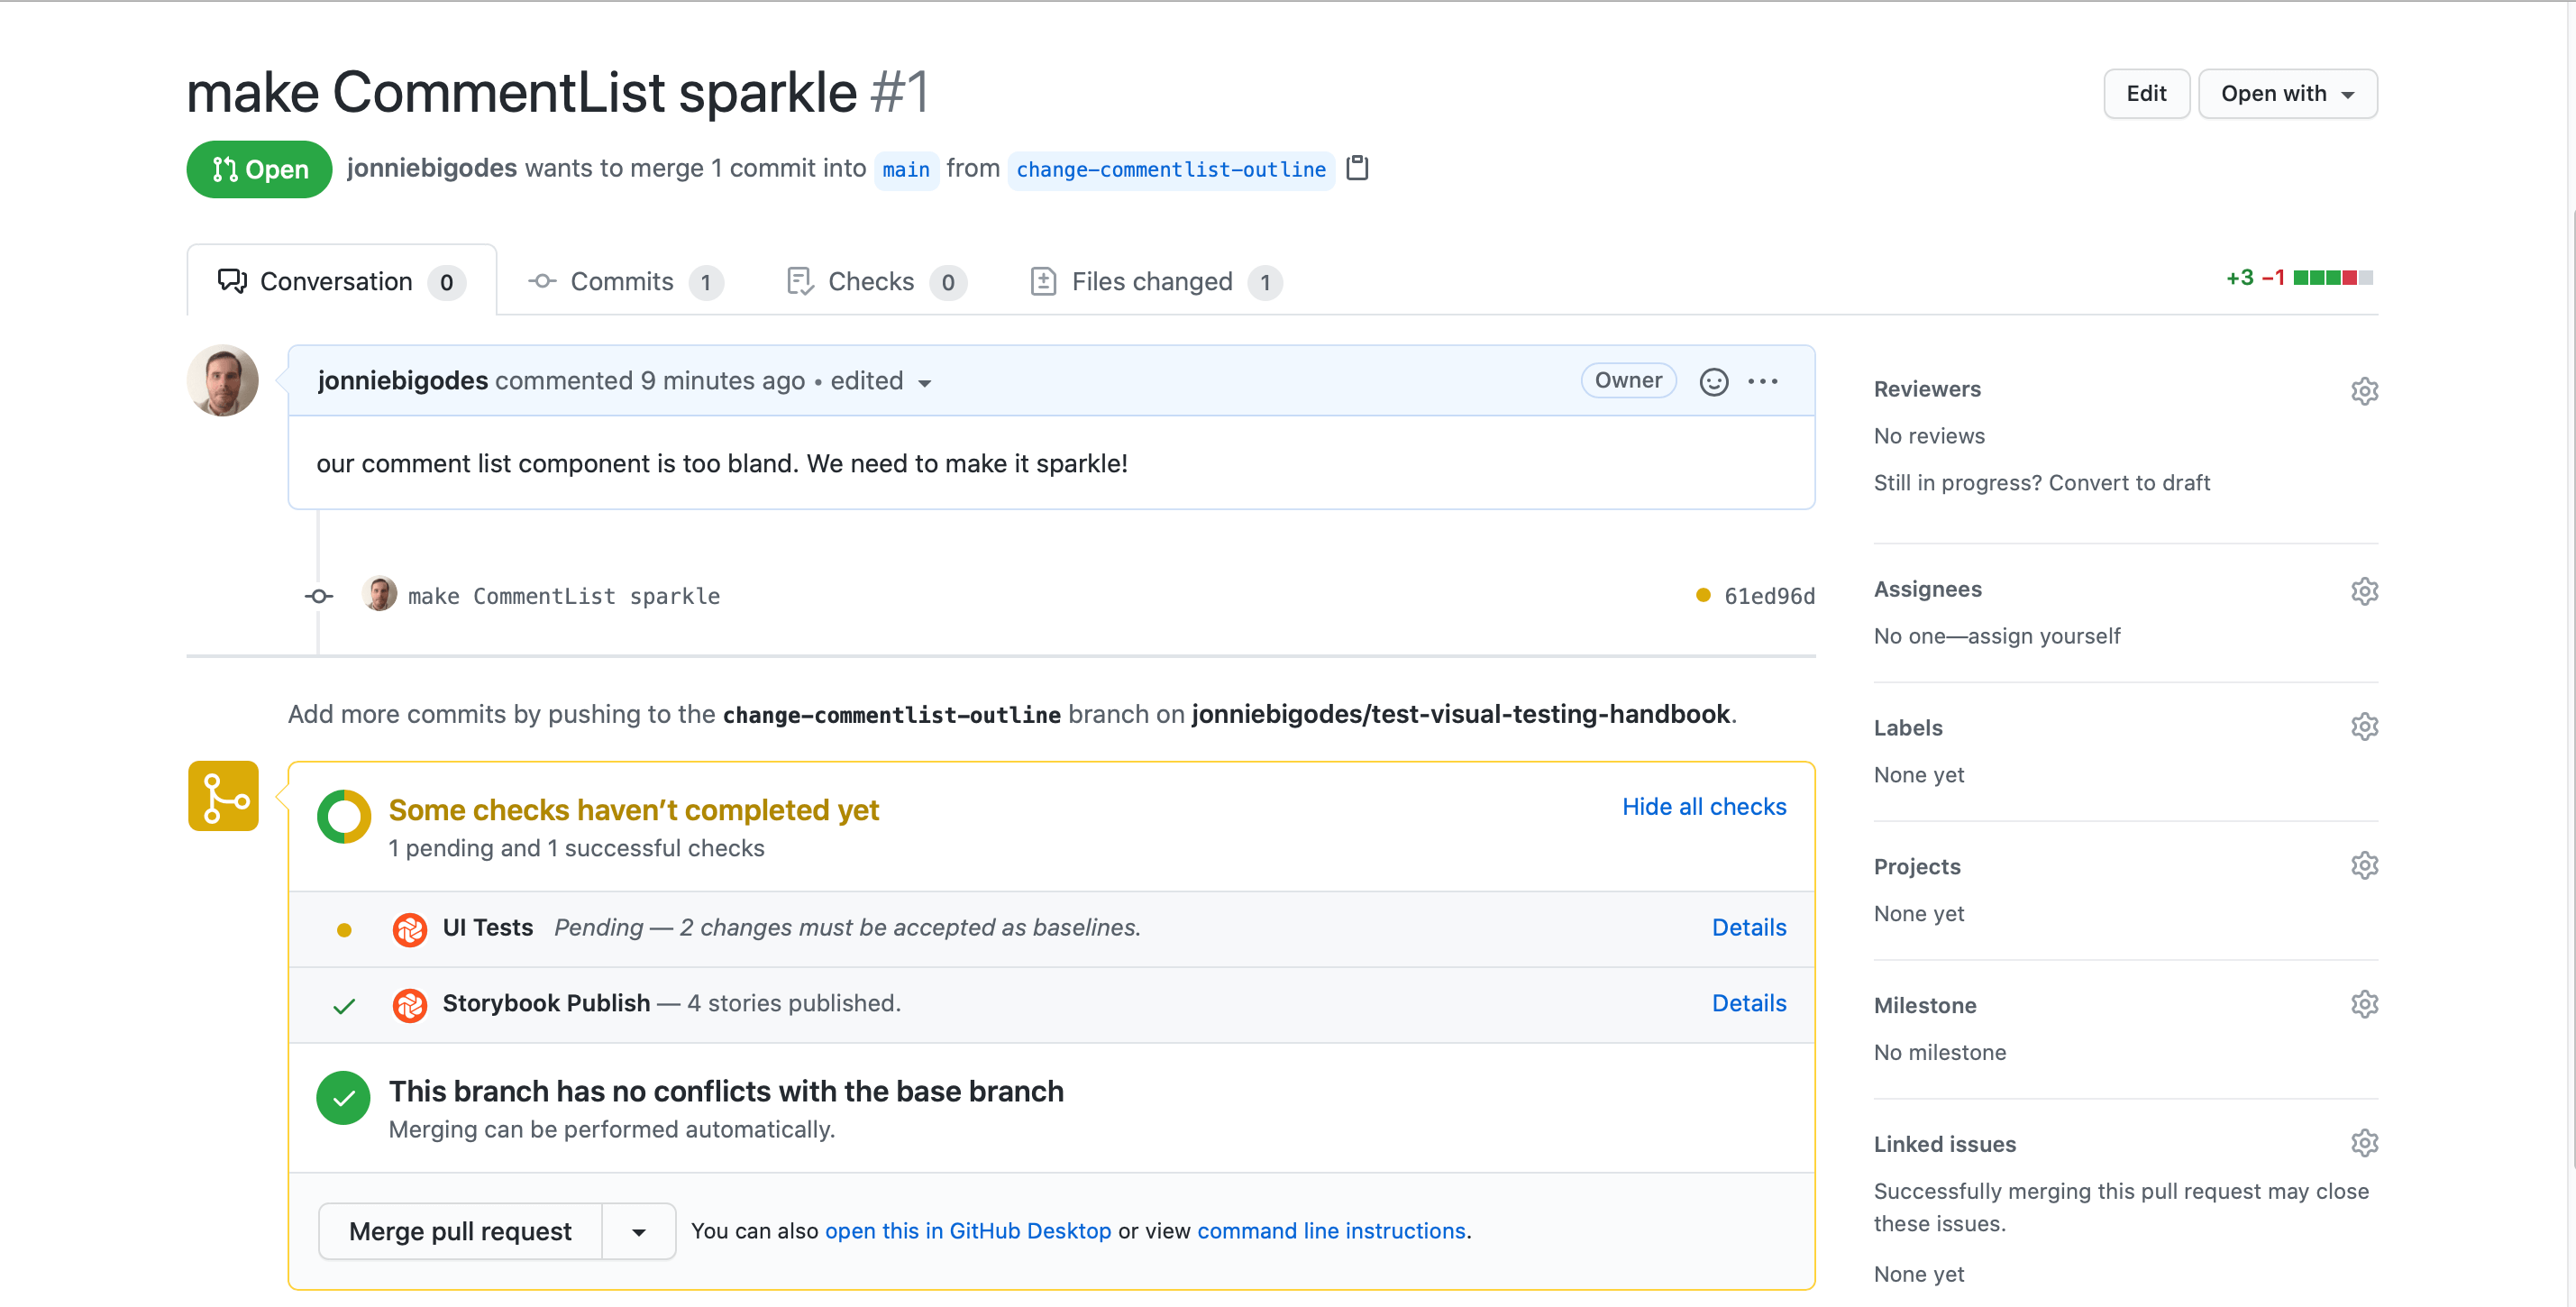 Comment list pull requested opened in GitHub